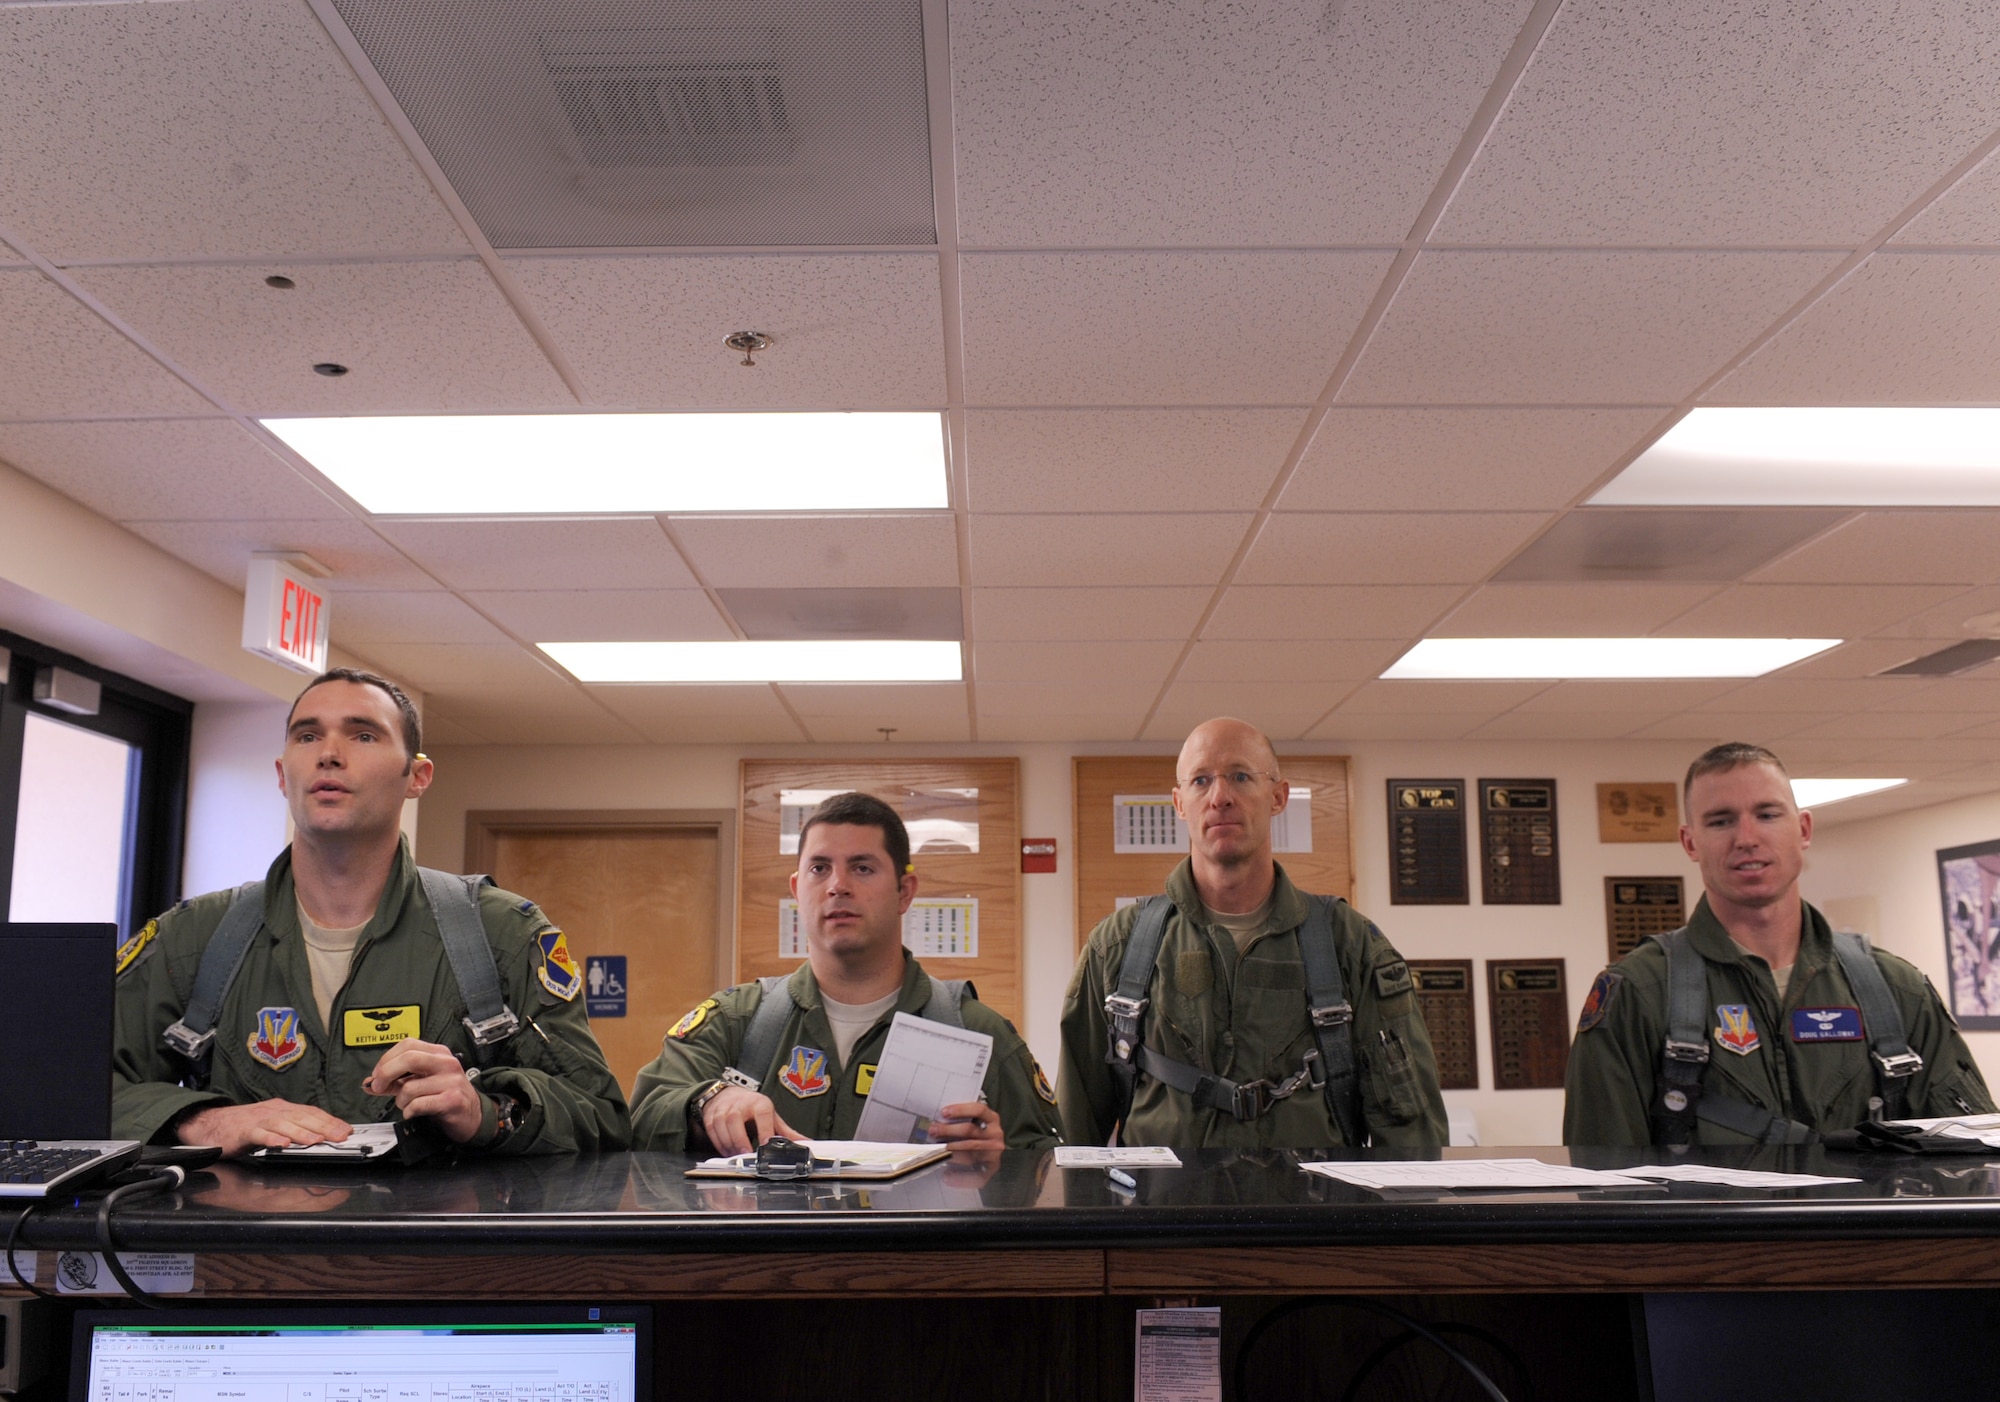 U.S Air Force Airmen from the 357th Fighter Squadron perform their step brief prior to leaving for the flightline on Davis-Monthan Air Force Base, Ariz., Nov. 7, 2012. The step brief consists of finding which aircraft the pilot will fly, what the weather may be like while flying as well as things the pilot must check before departing. (U.S Air Force photo by Airman 1st Class Christine Griffiths/Released) 